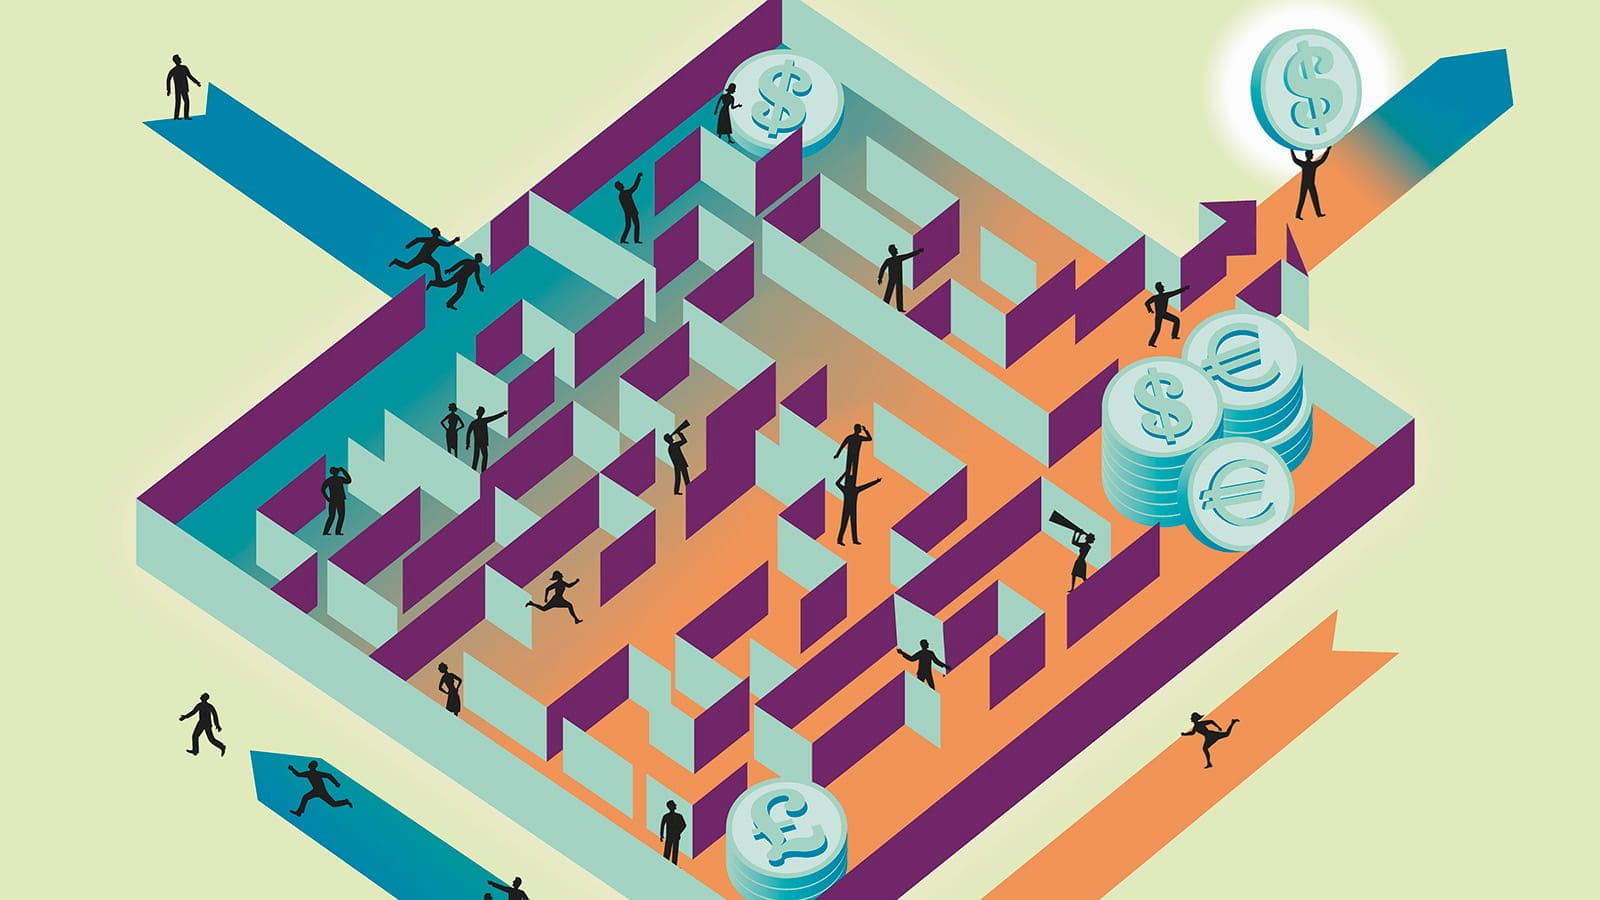 Illustration of a maze with people searching for piles of coins inside it